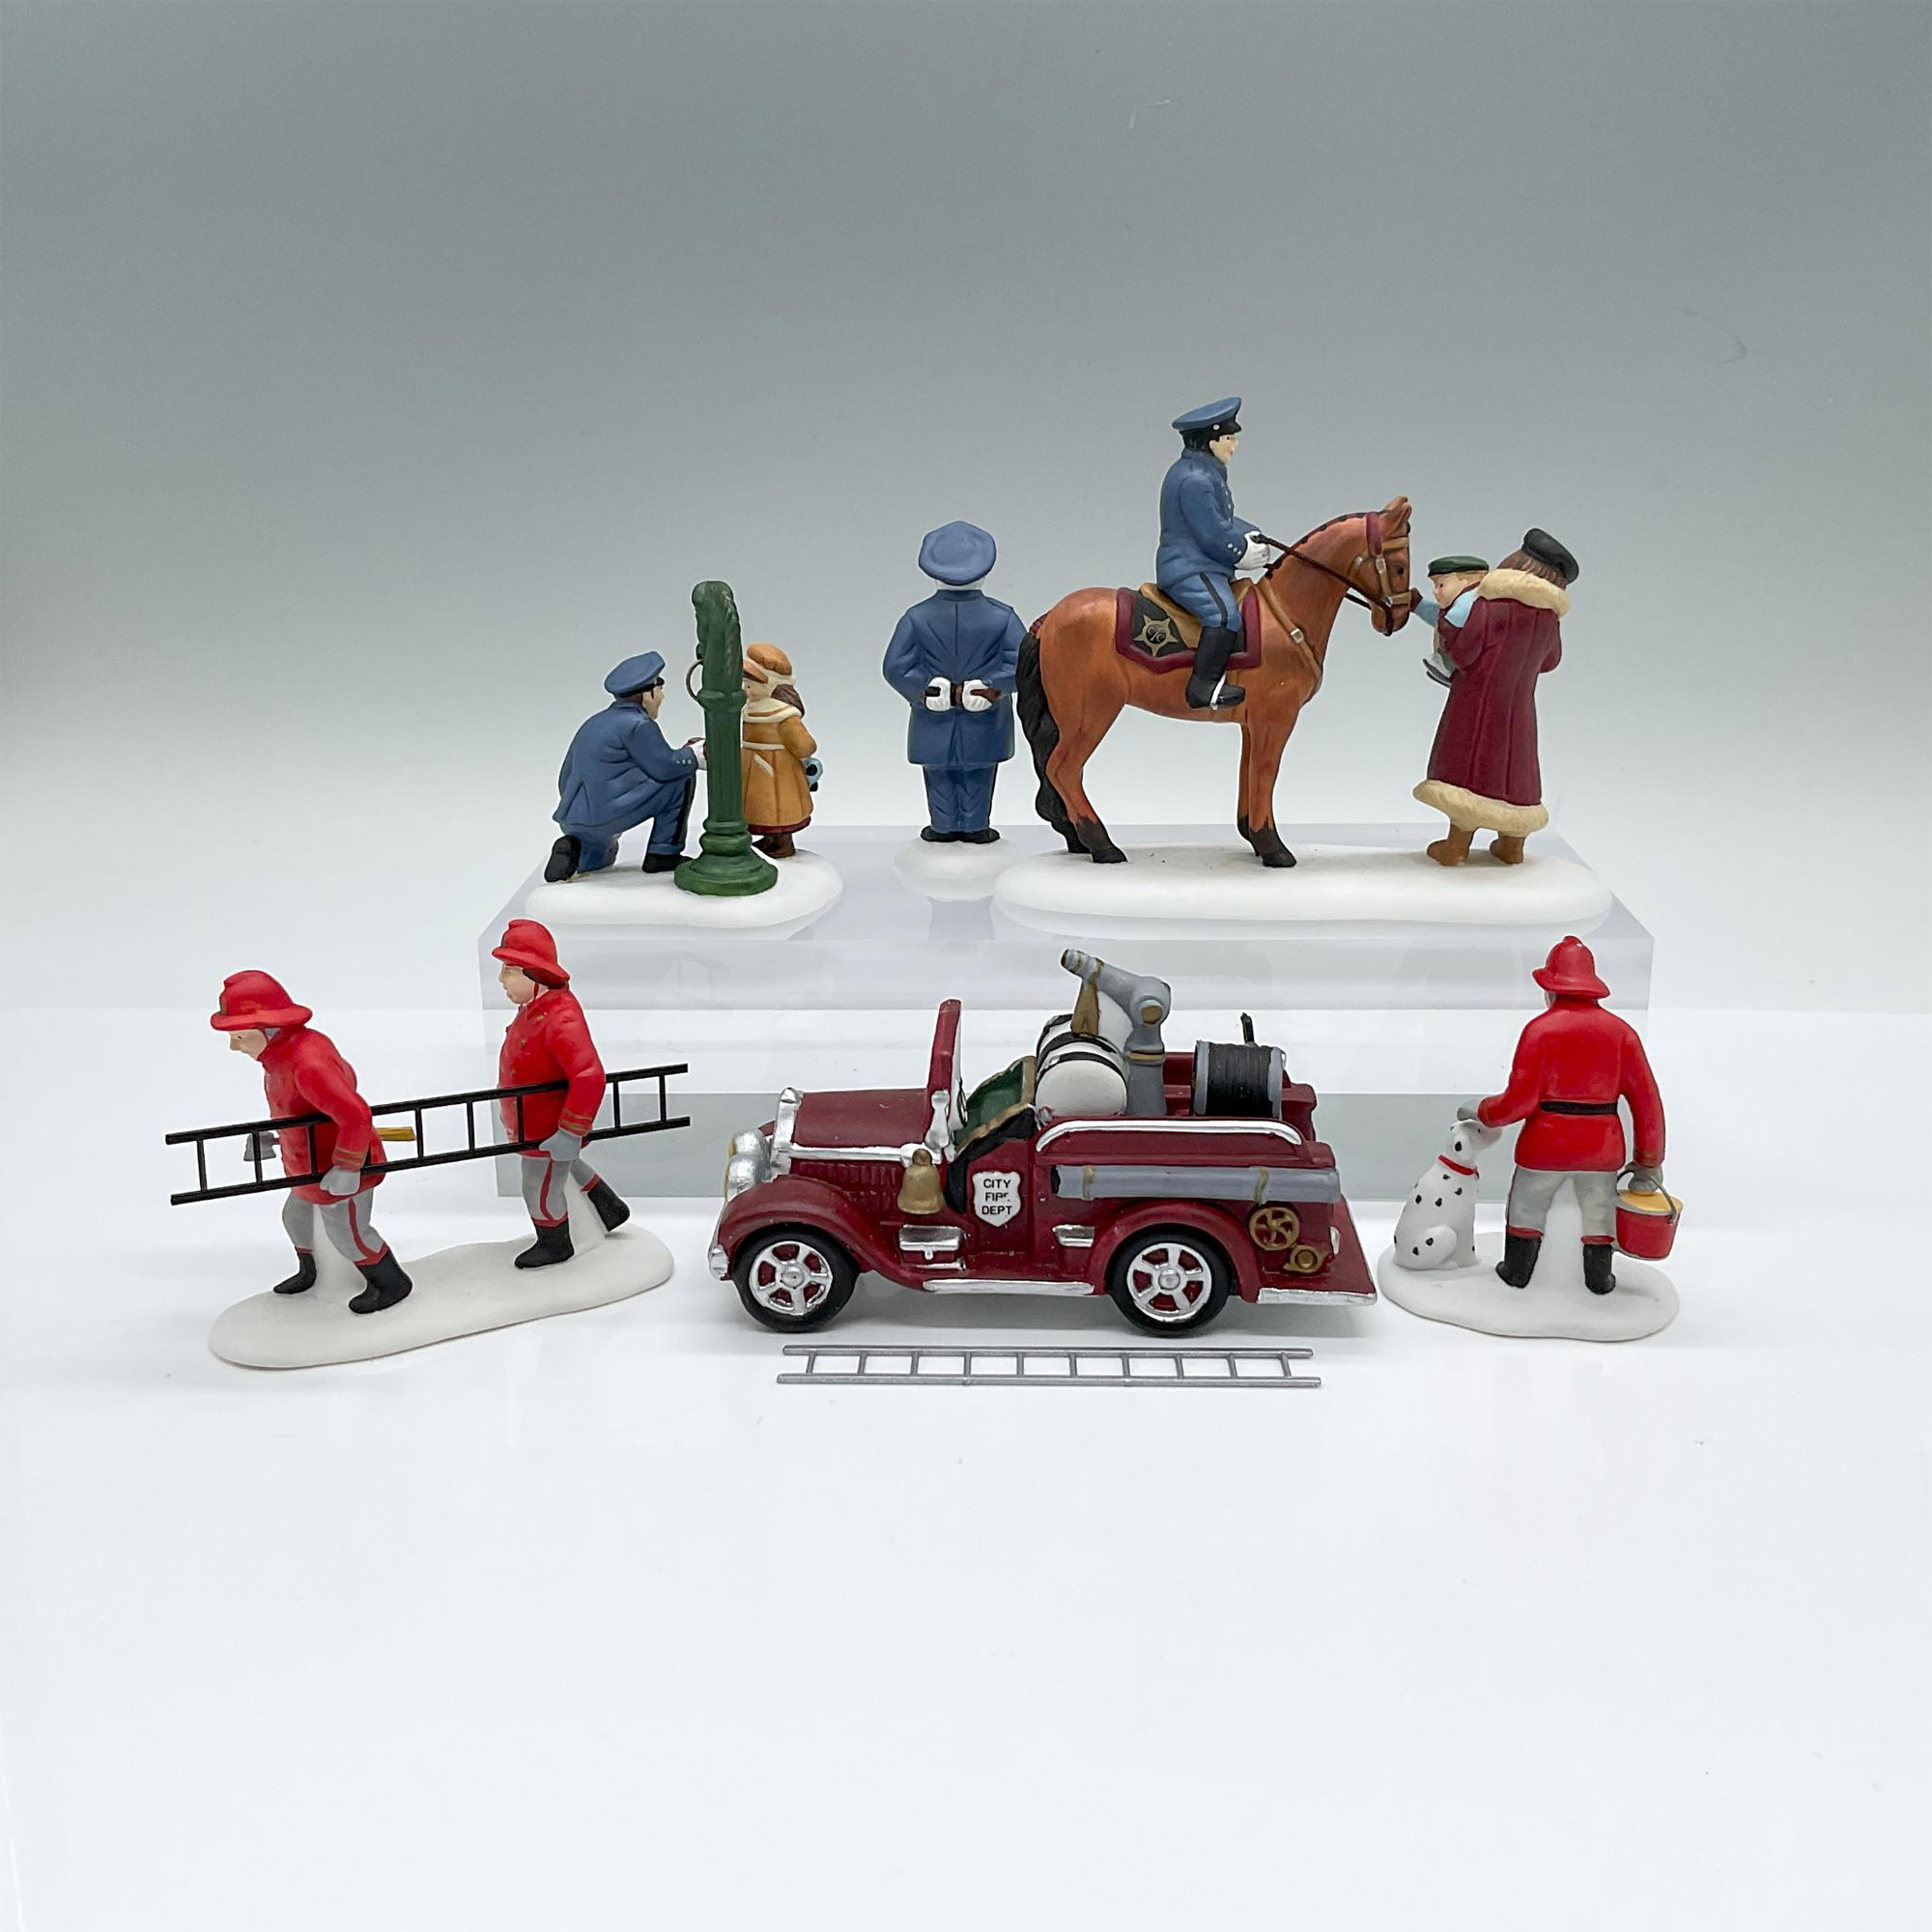 3pc Department 56 Heritage Village Collection Figurines - Image 2 of 4